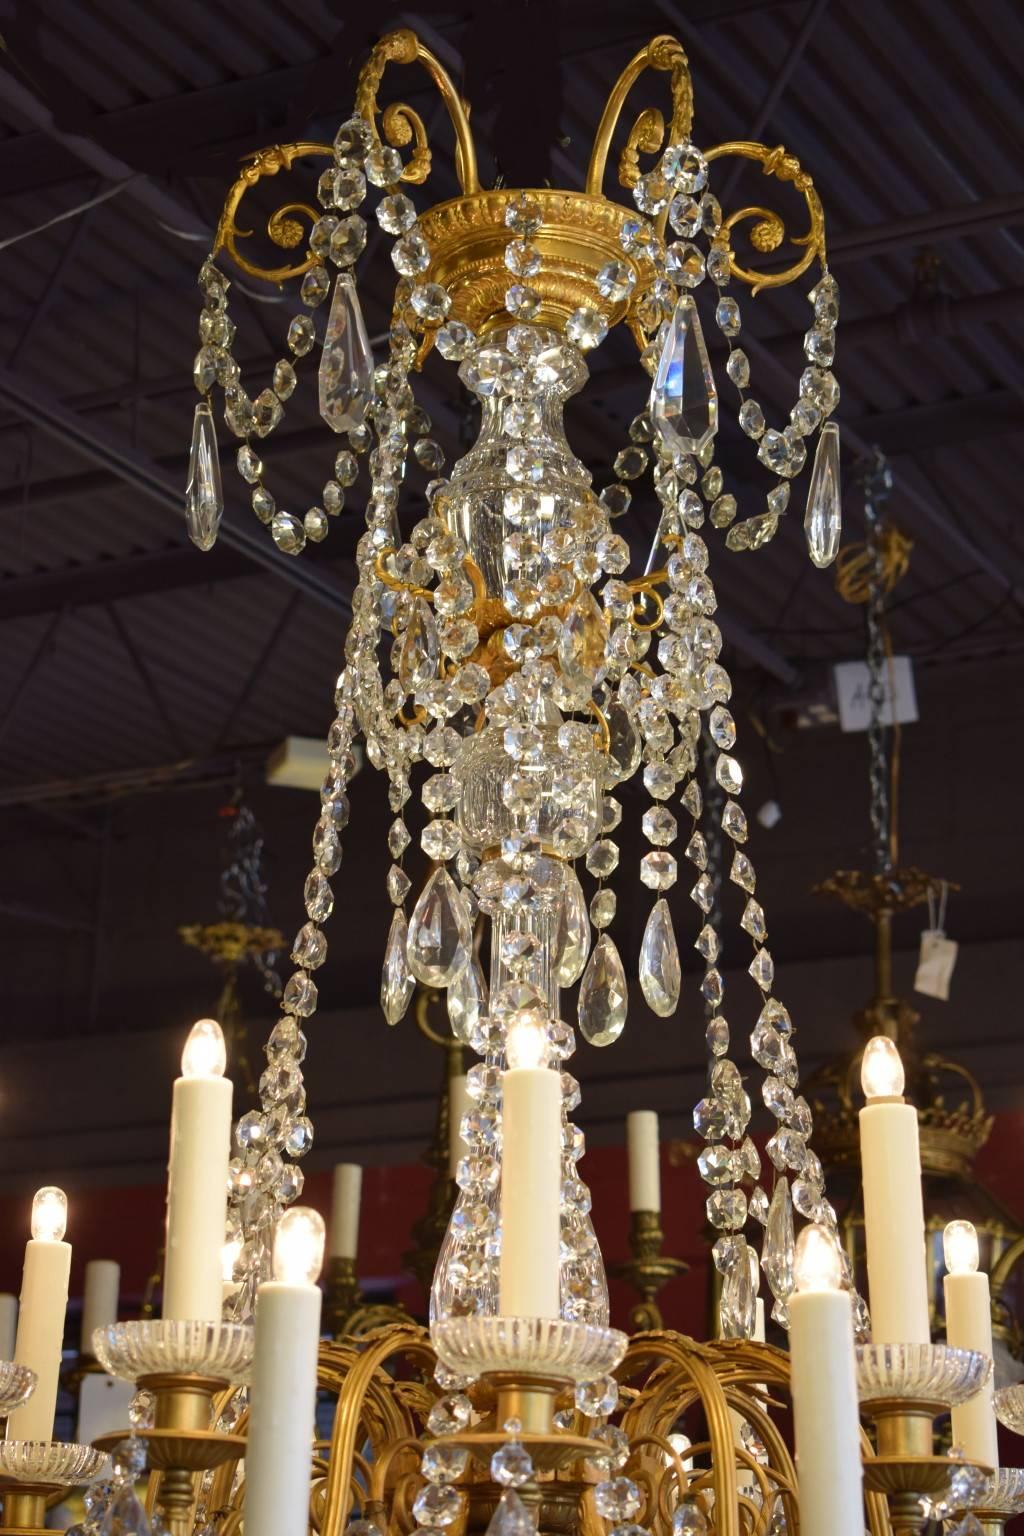 Superb gilt bronze chandelier with hand-cut centerpieces, crystals and swags.